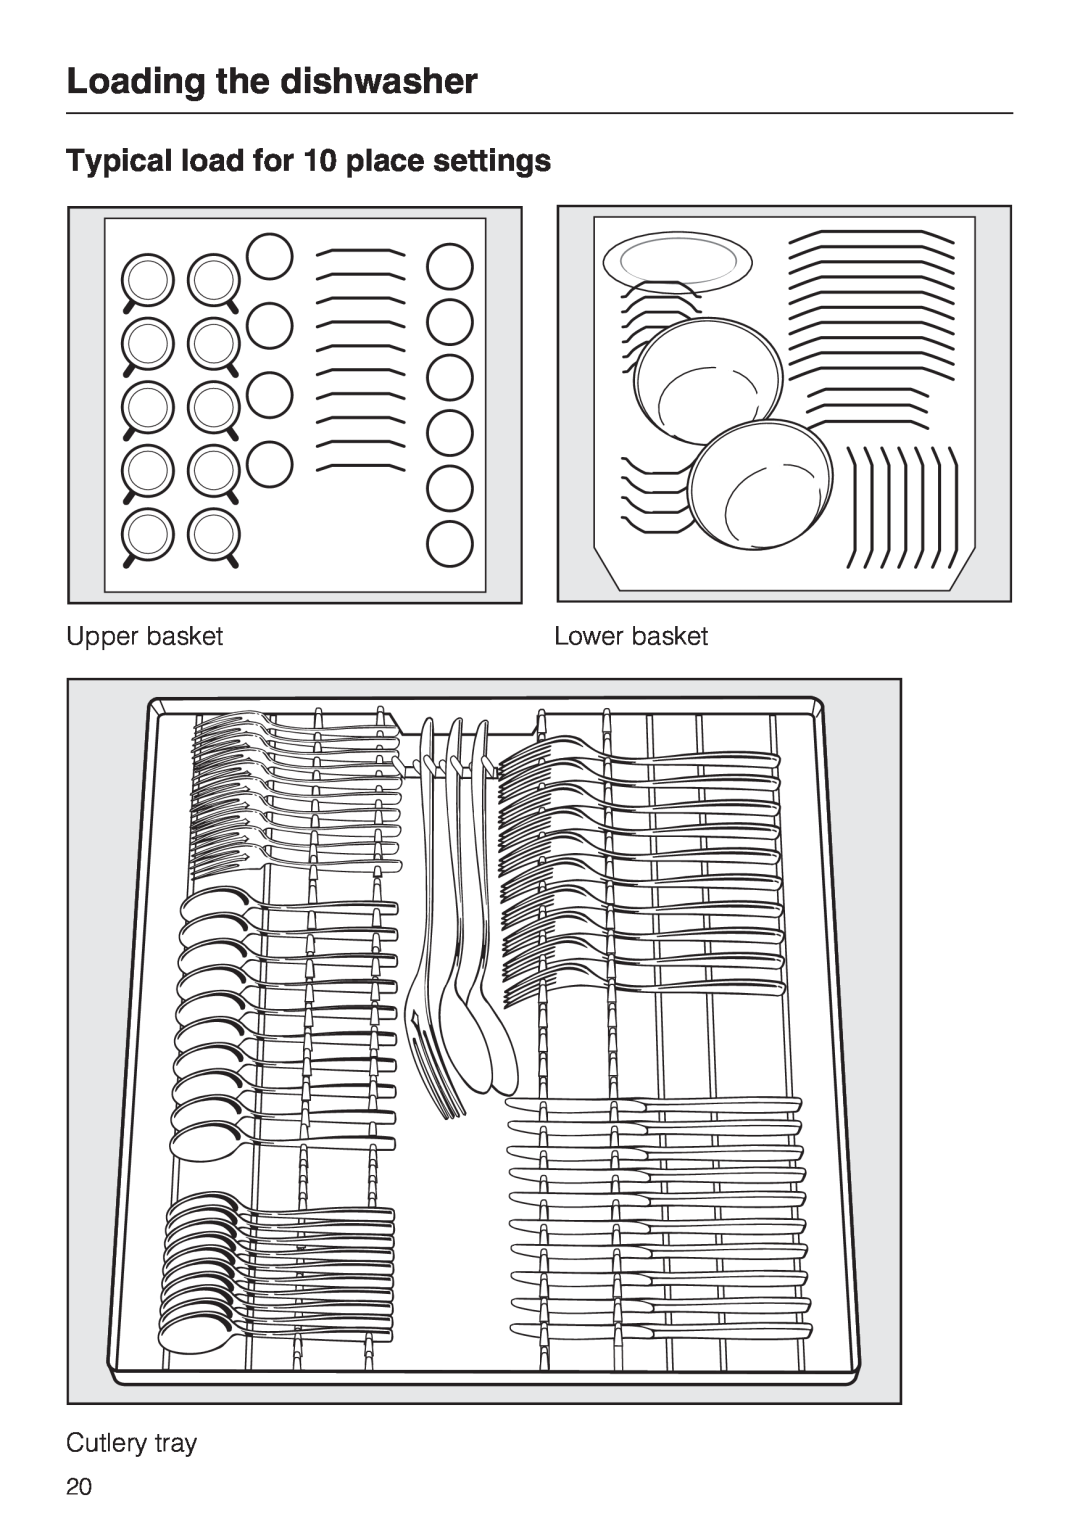 Miele G 5810, G 5815 Typical load for 10 place settings, Loading the dishwasher, Upper basket, Lower basket, Cutlery tray 